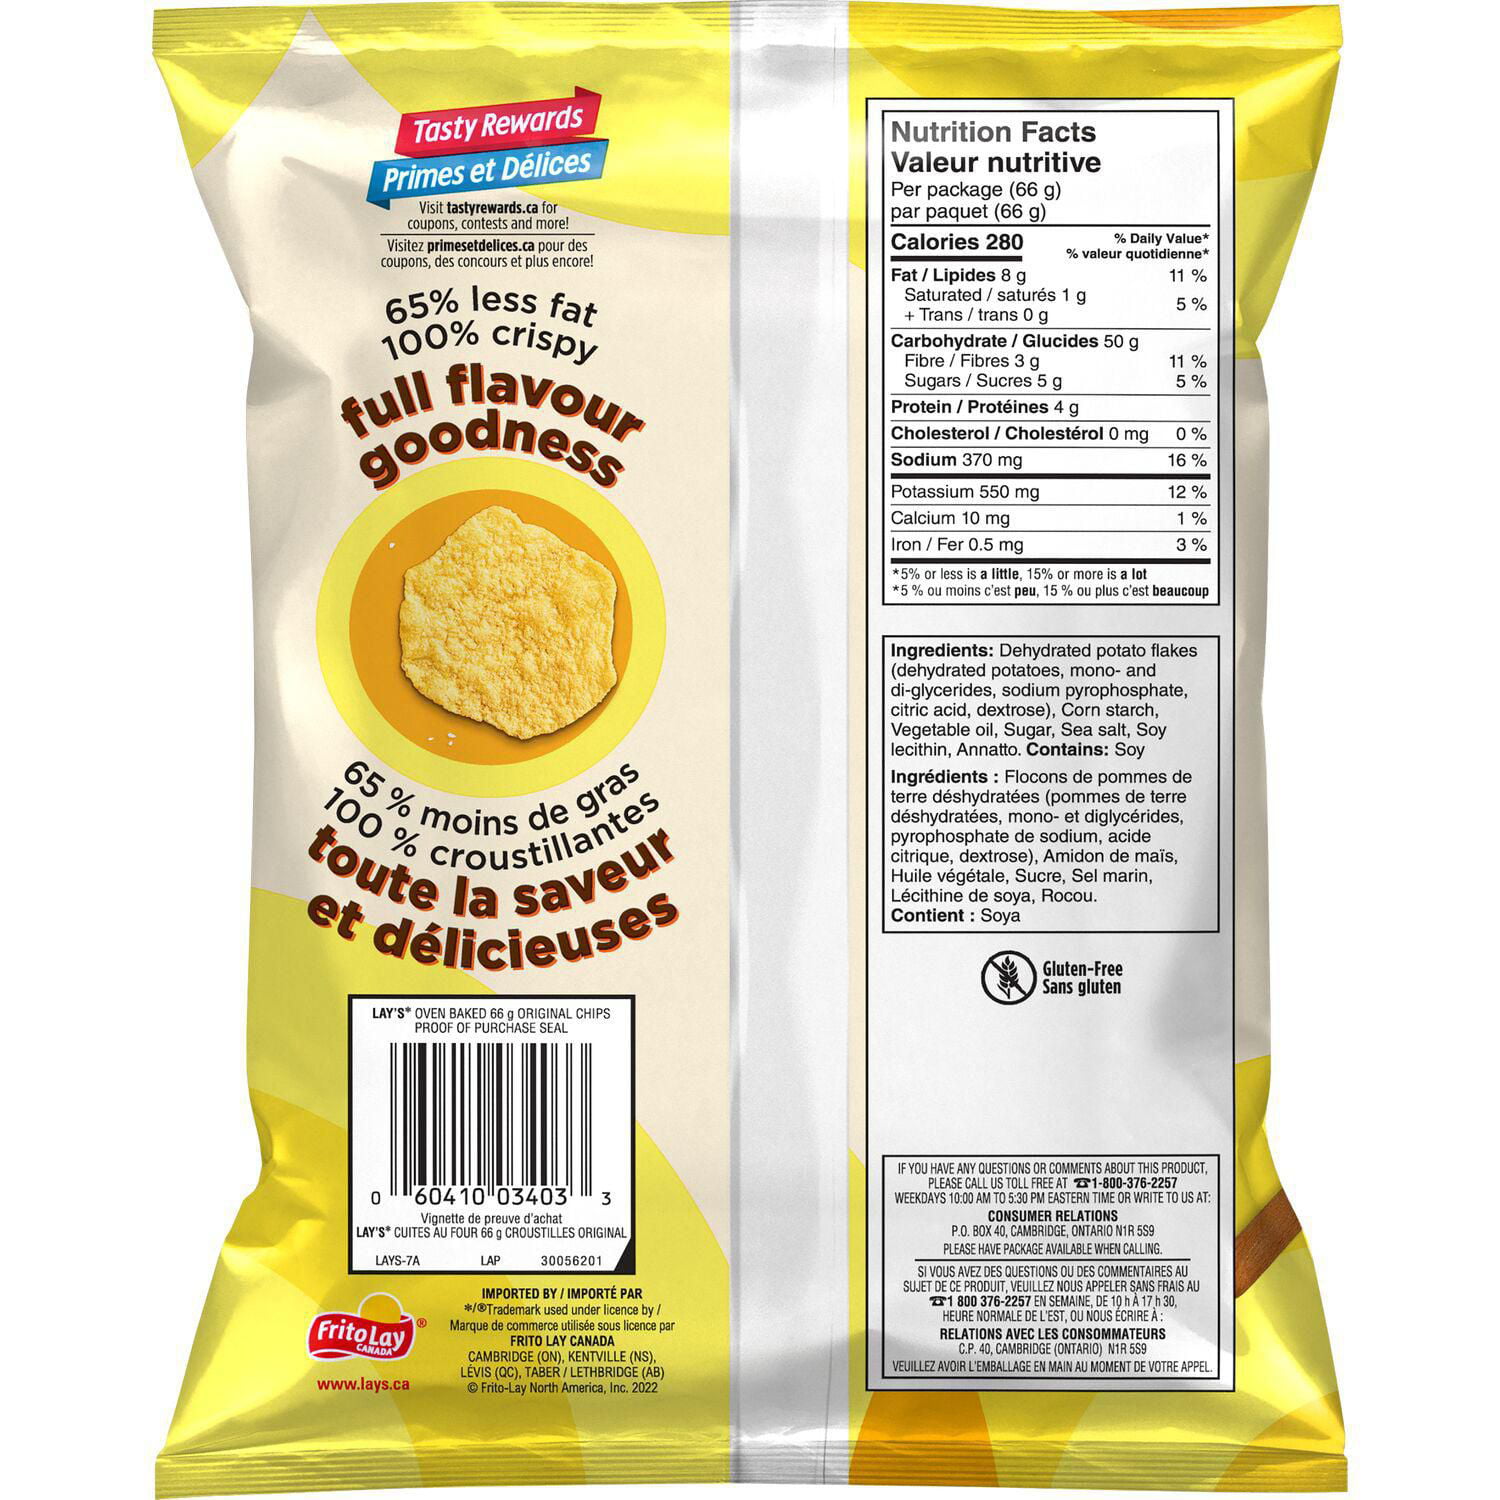 Lay's Oven Baked Original Potato Chips, 66g